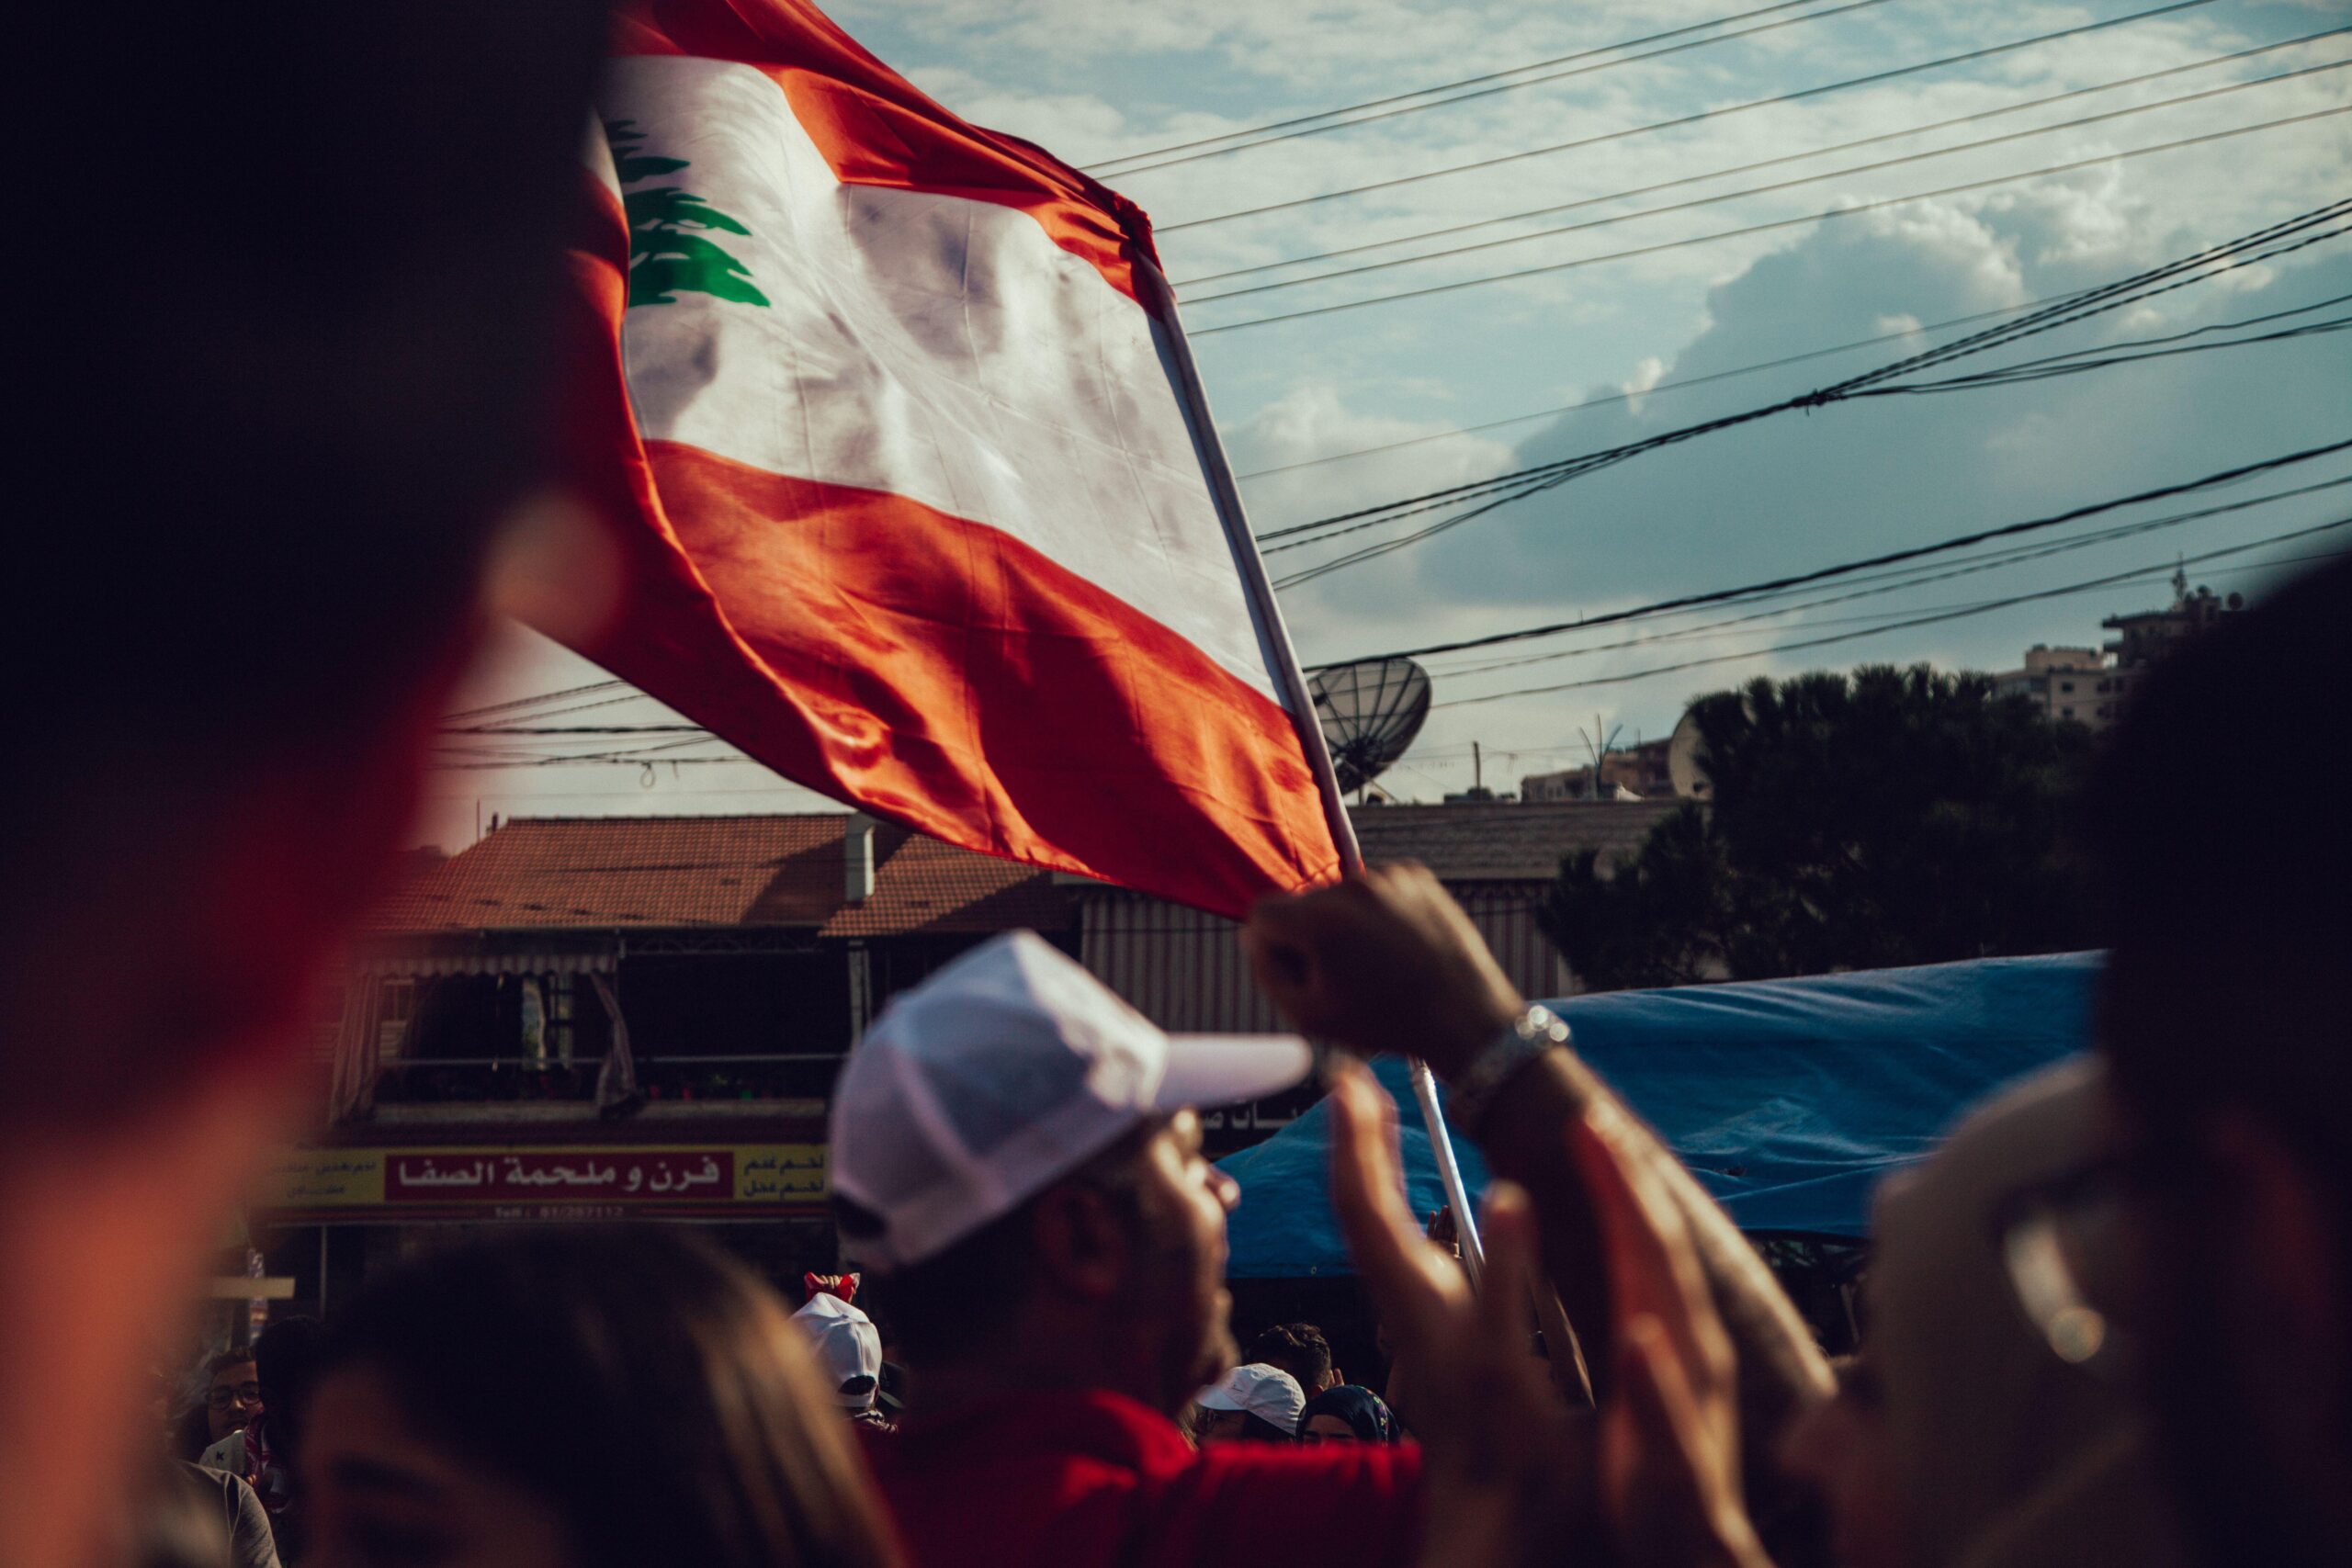 Counter-Sectarianism in Lebanon at a Crossroads